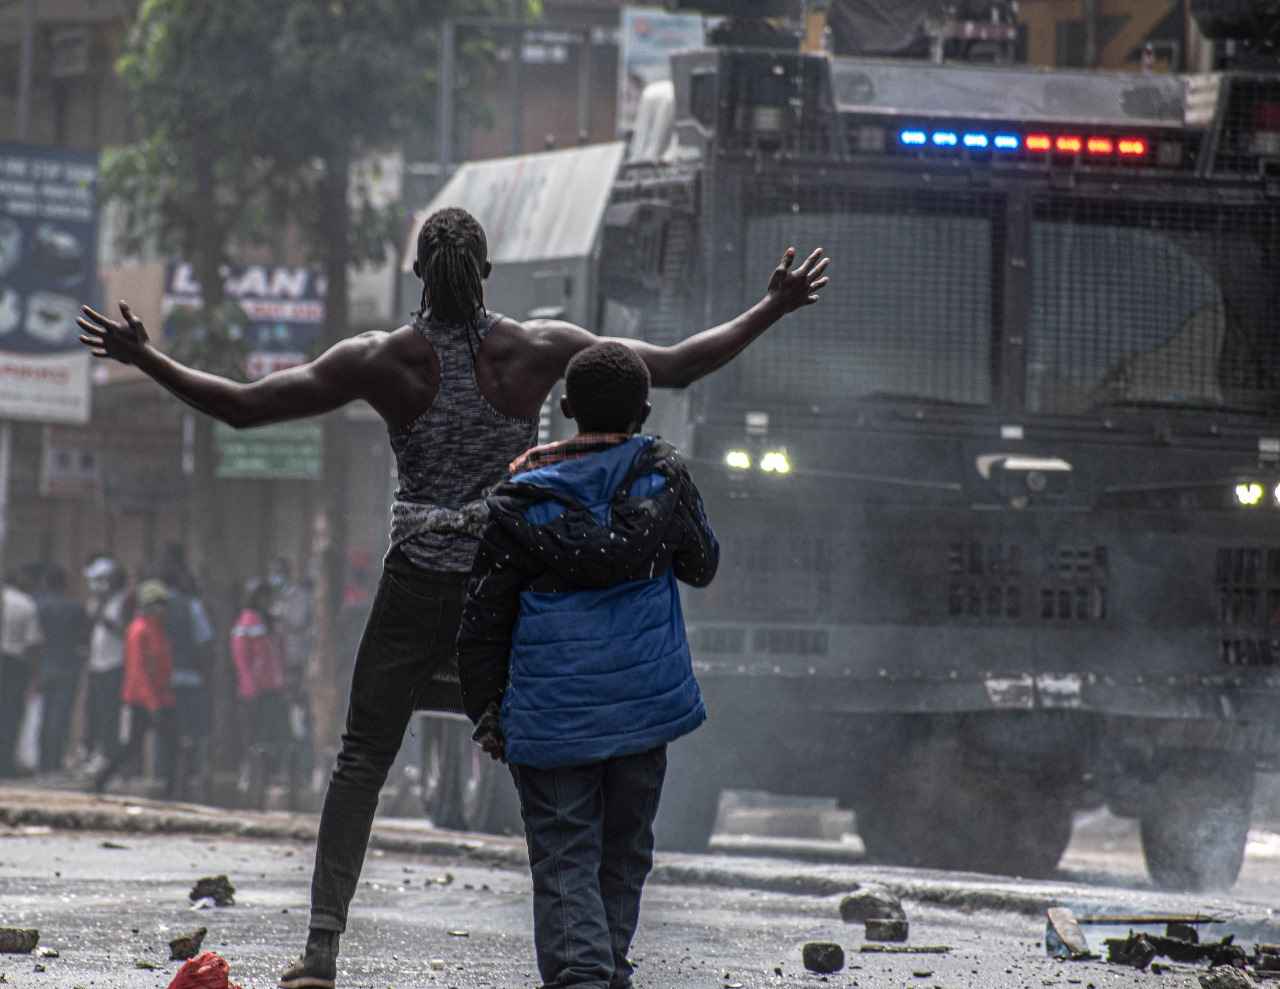 Kenya's protests started against a bill, but Gen Z seeks more. Tired of past struggles and failures, they demand leaders fulfil the 2010 Constitution's promises of accountability and good governance.